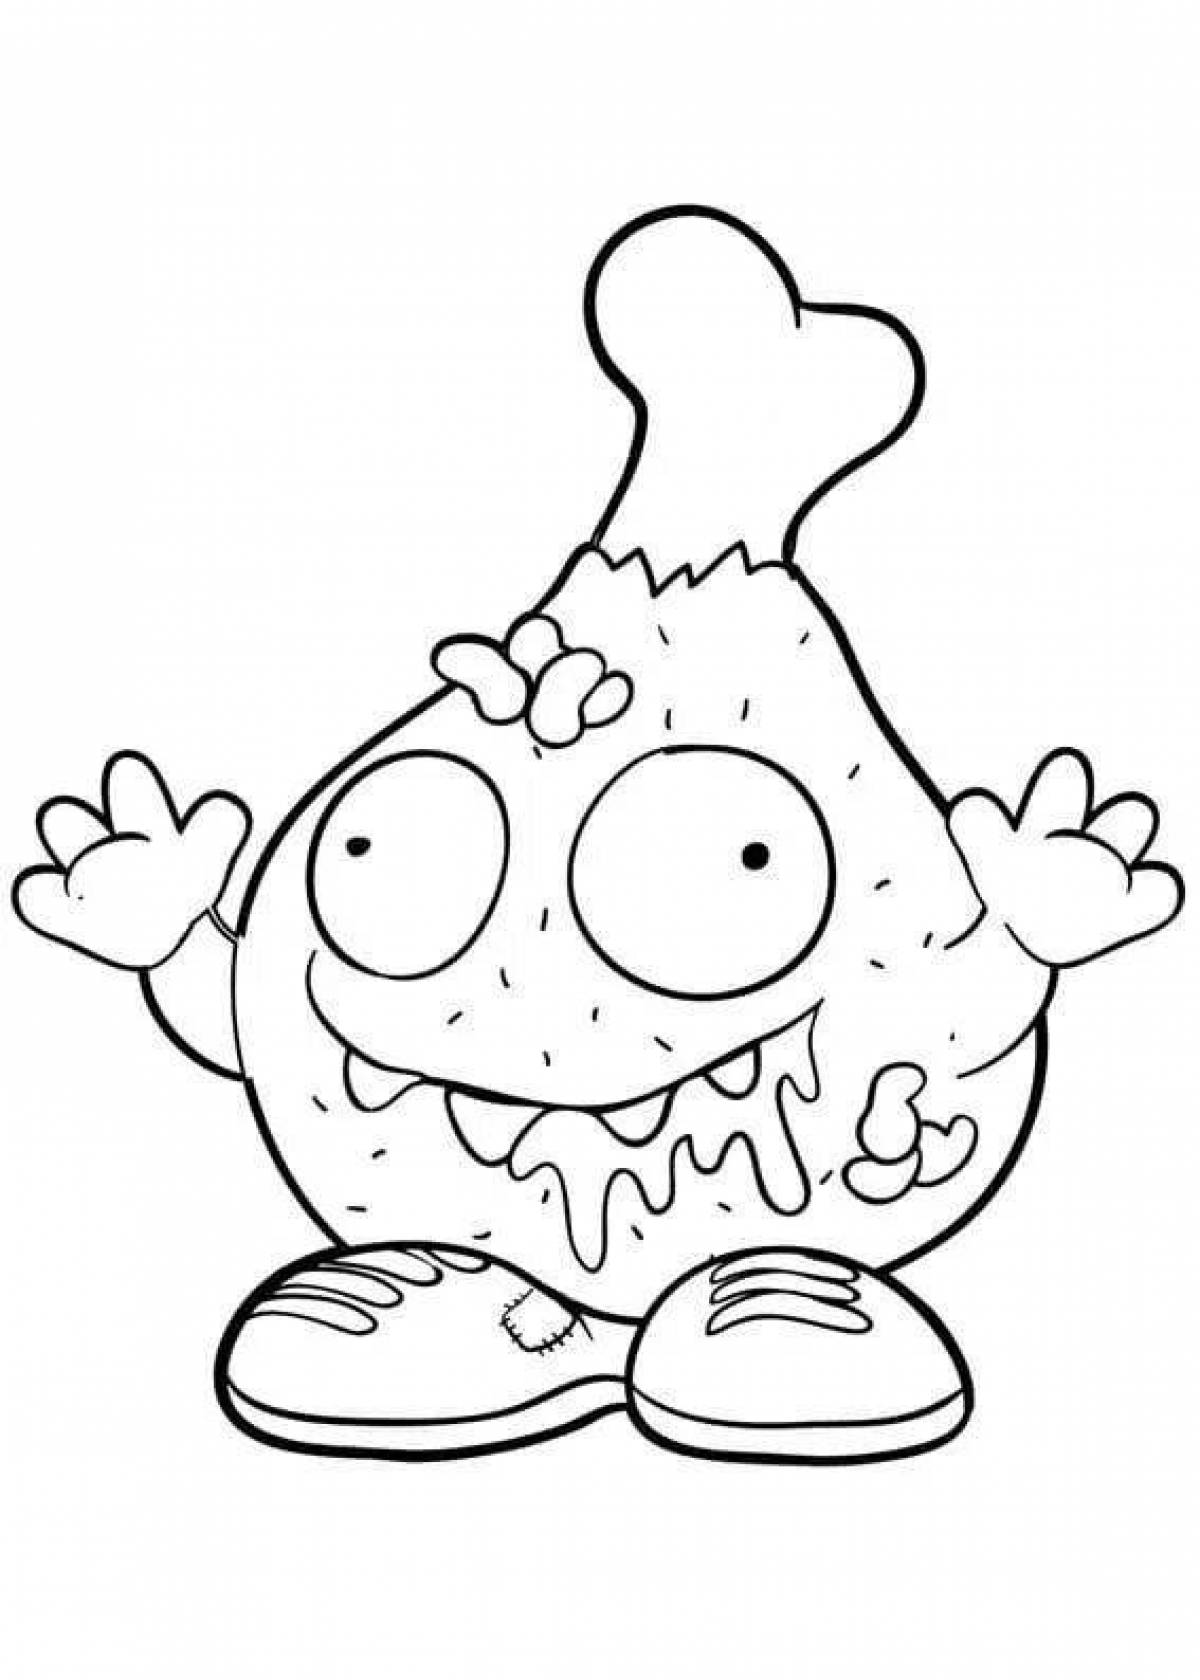 Funny monster coloring pages